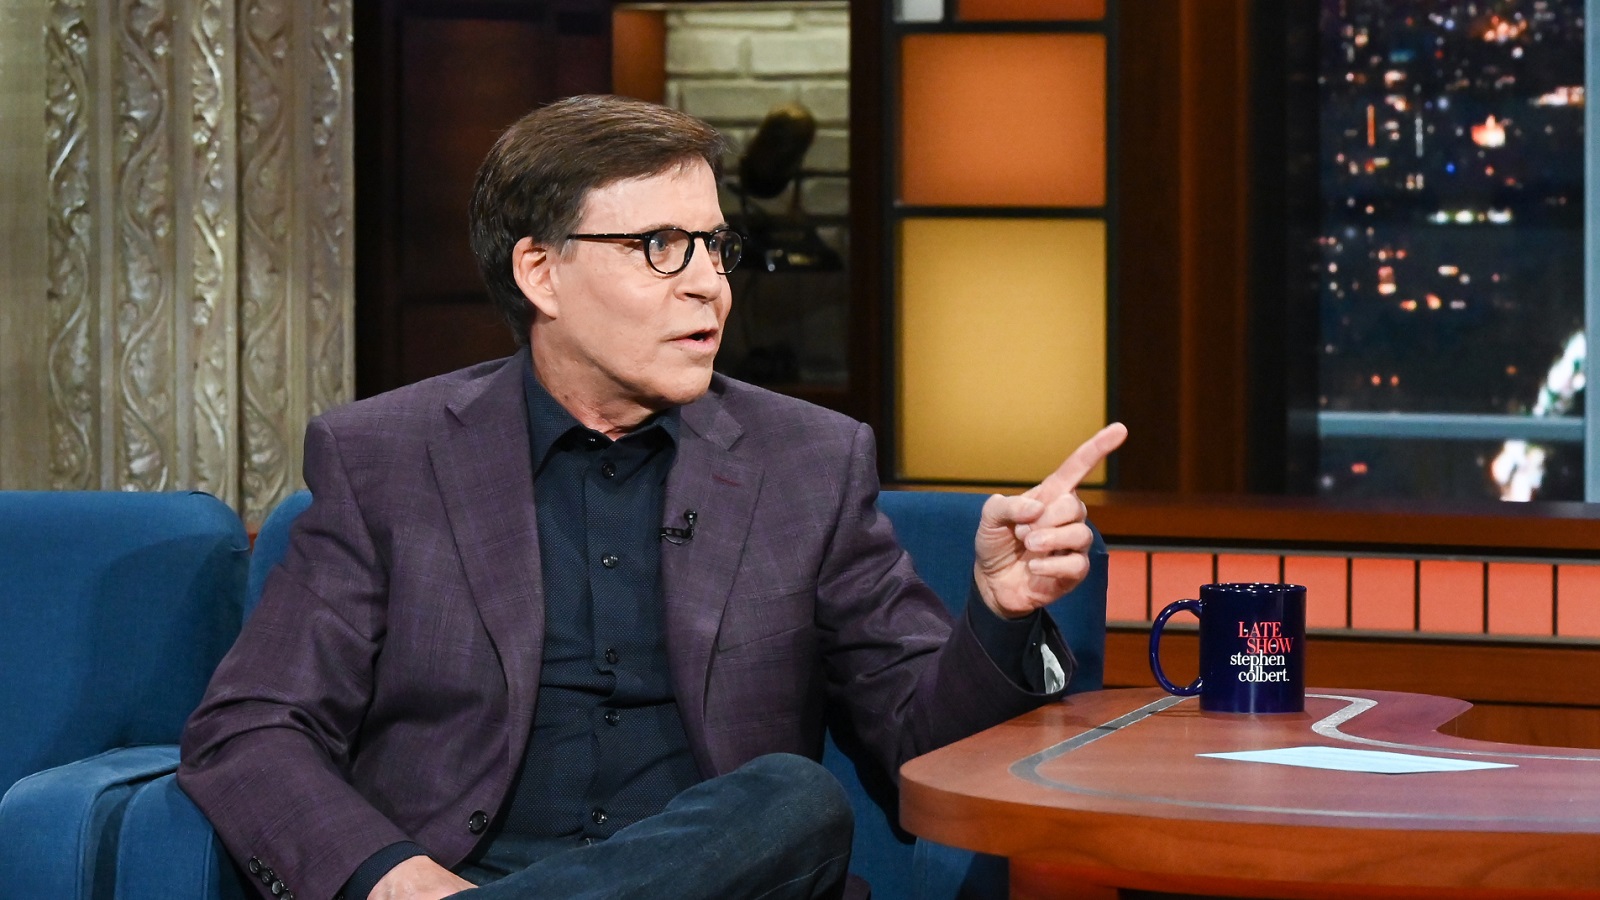 The Late Show with Stephen Colbert and guest Bob Costas during the July 21, 2021 show.